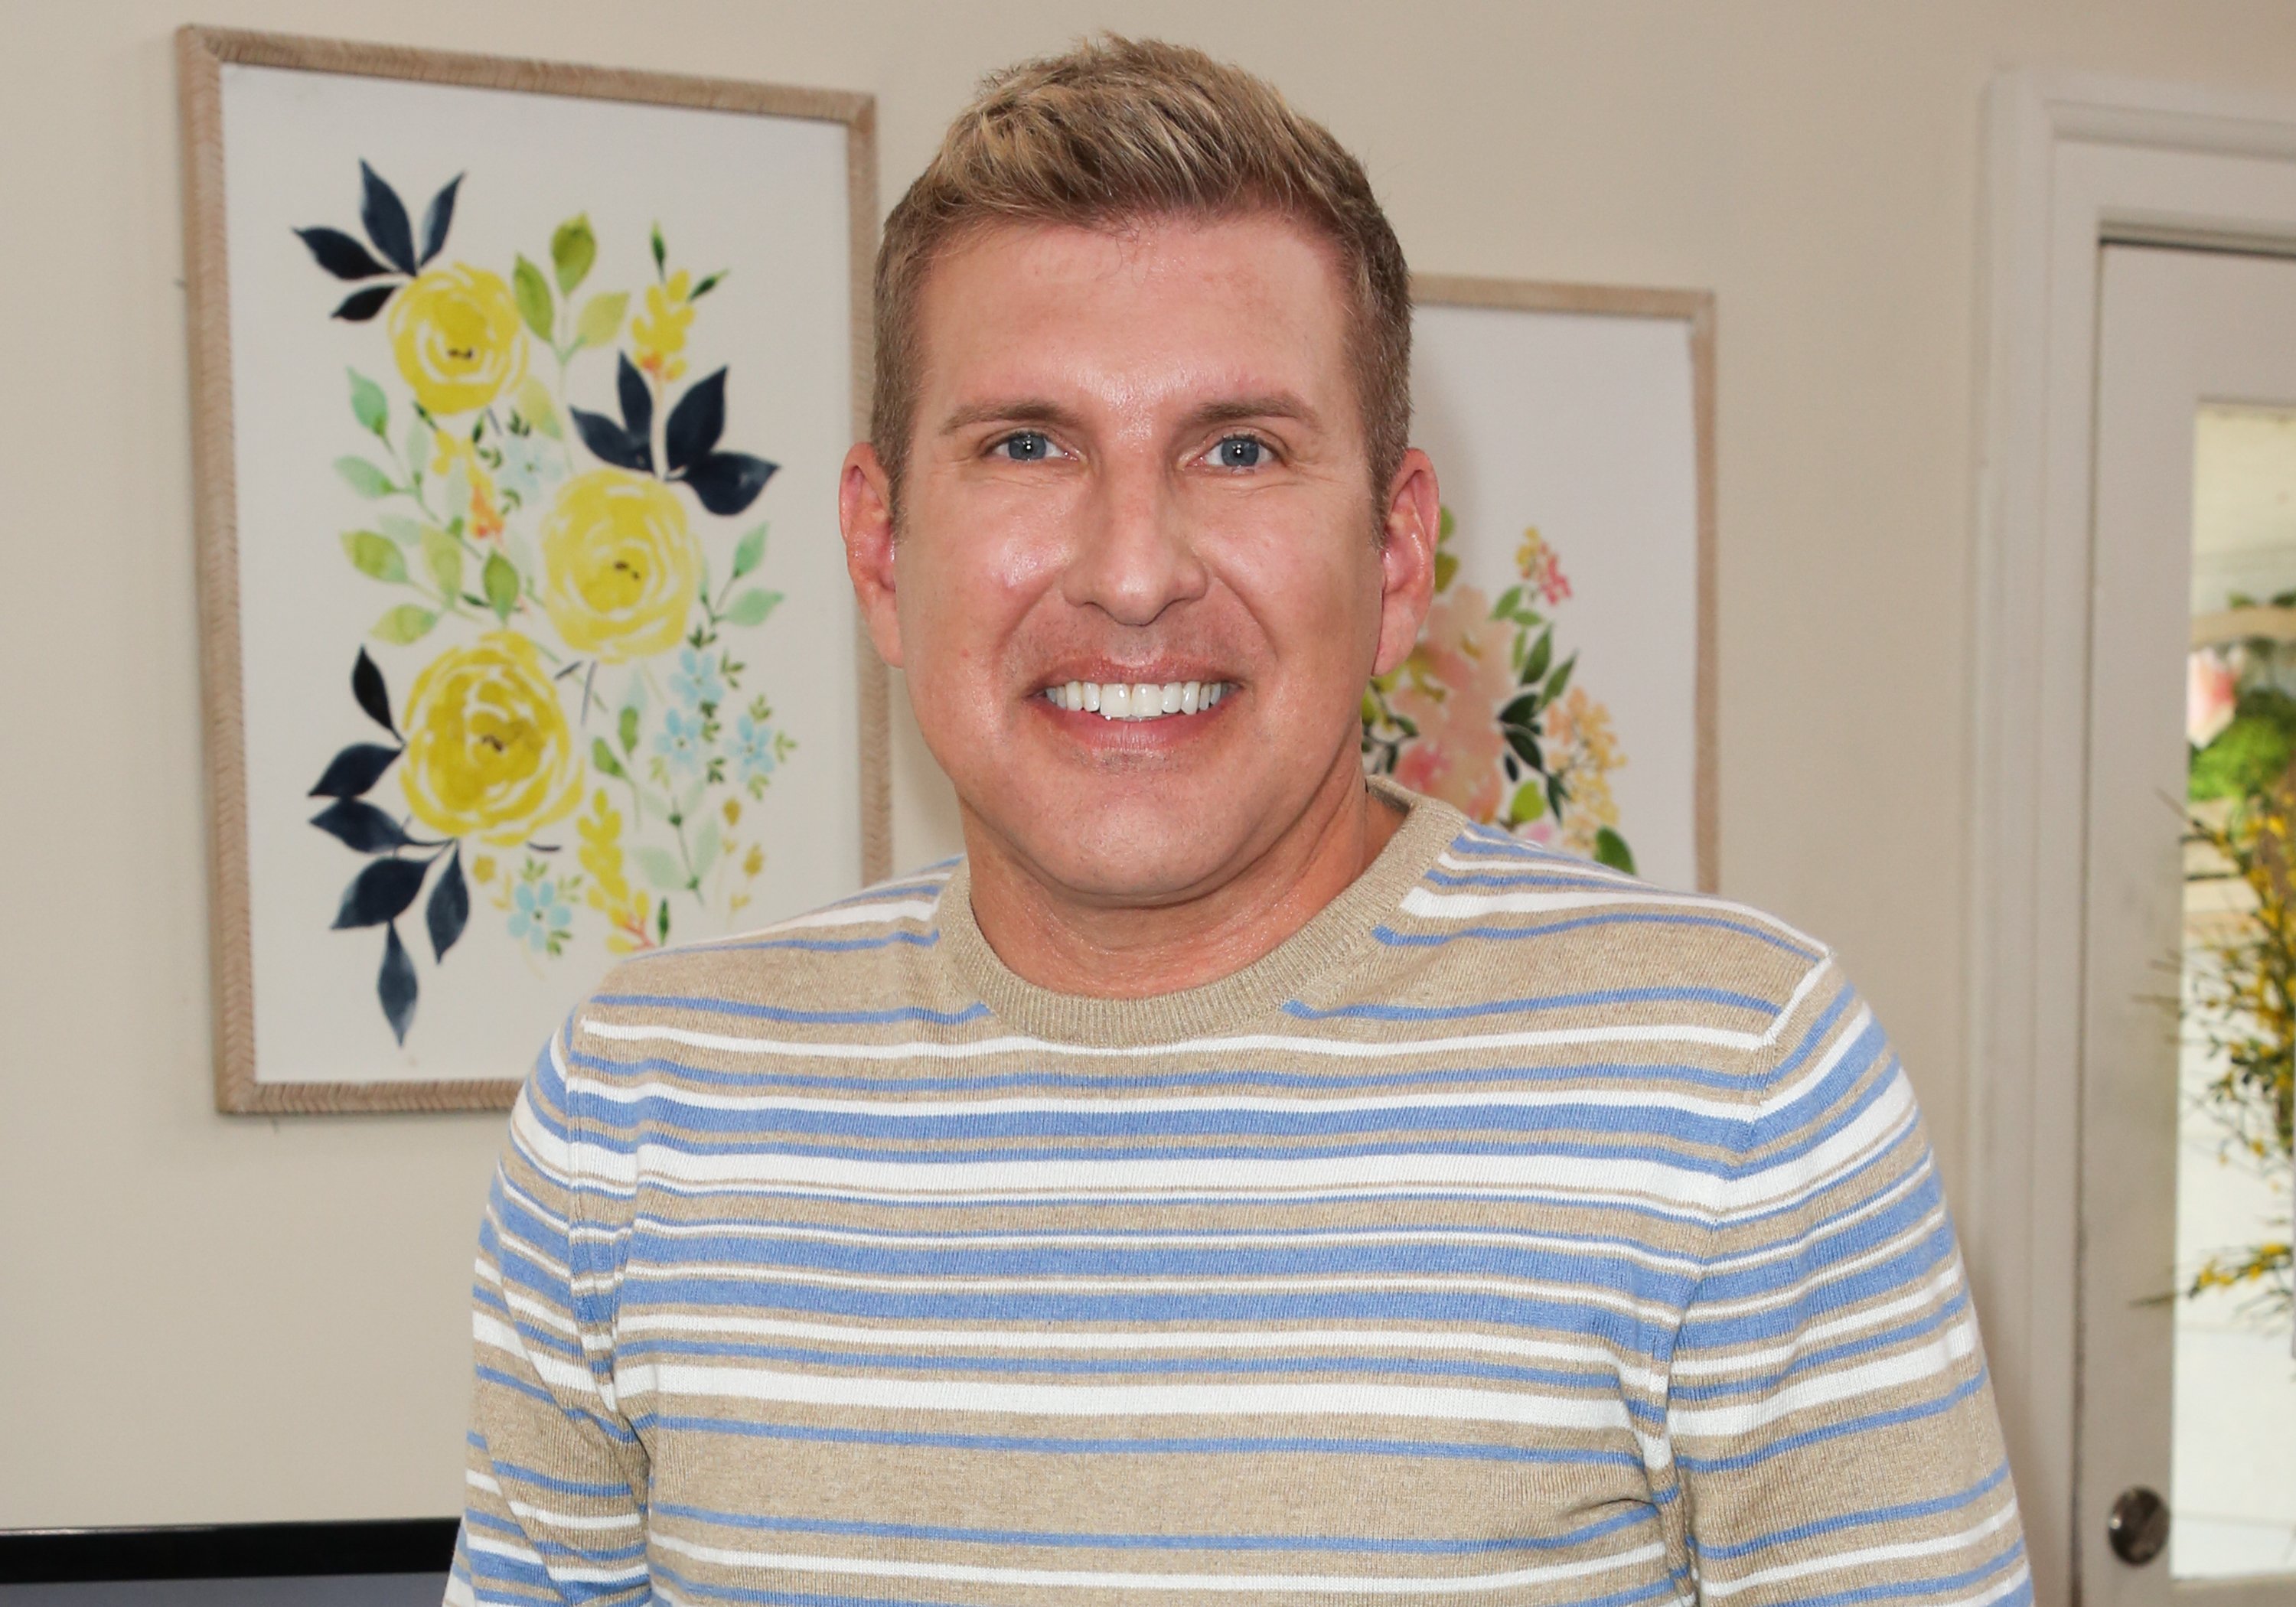 Reality TV Personality Todd Chrisley visit Hallmark's "Home & Family" at Universal Studios Hollywood on June 18, 2018 in Universal City, California | Photo: Getty Images